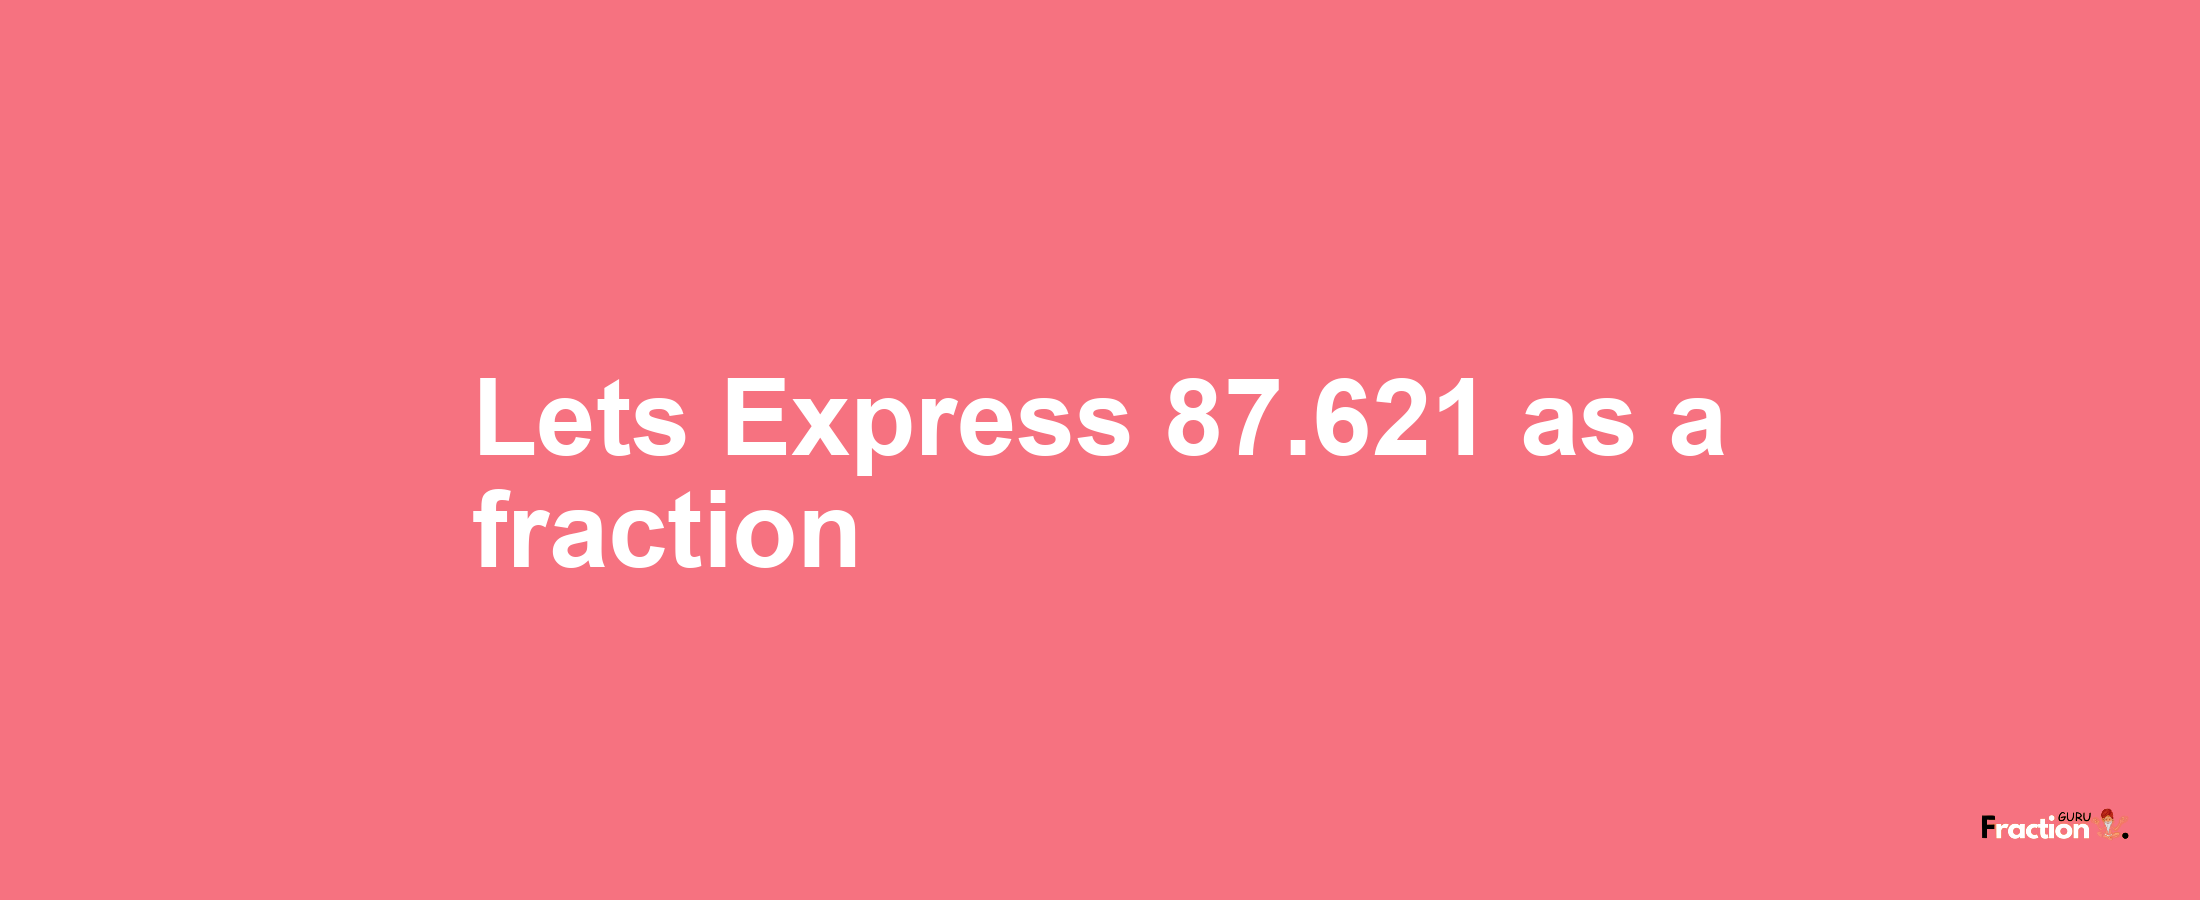 Lets Express 87.621 as afraction